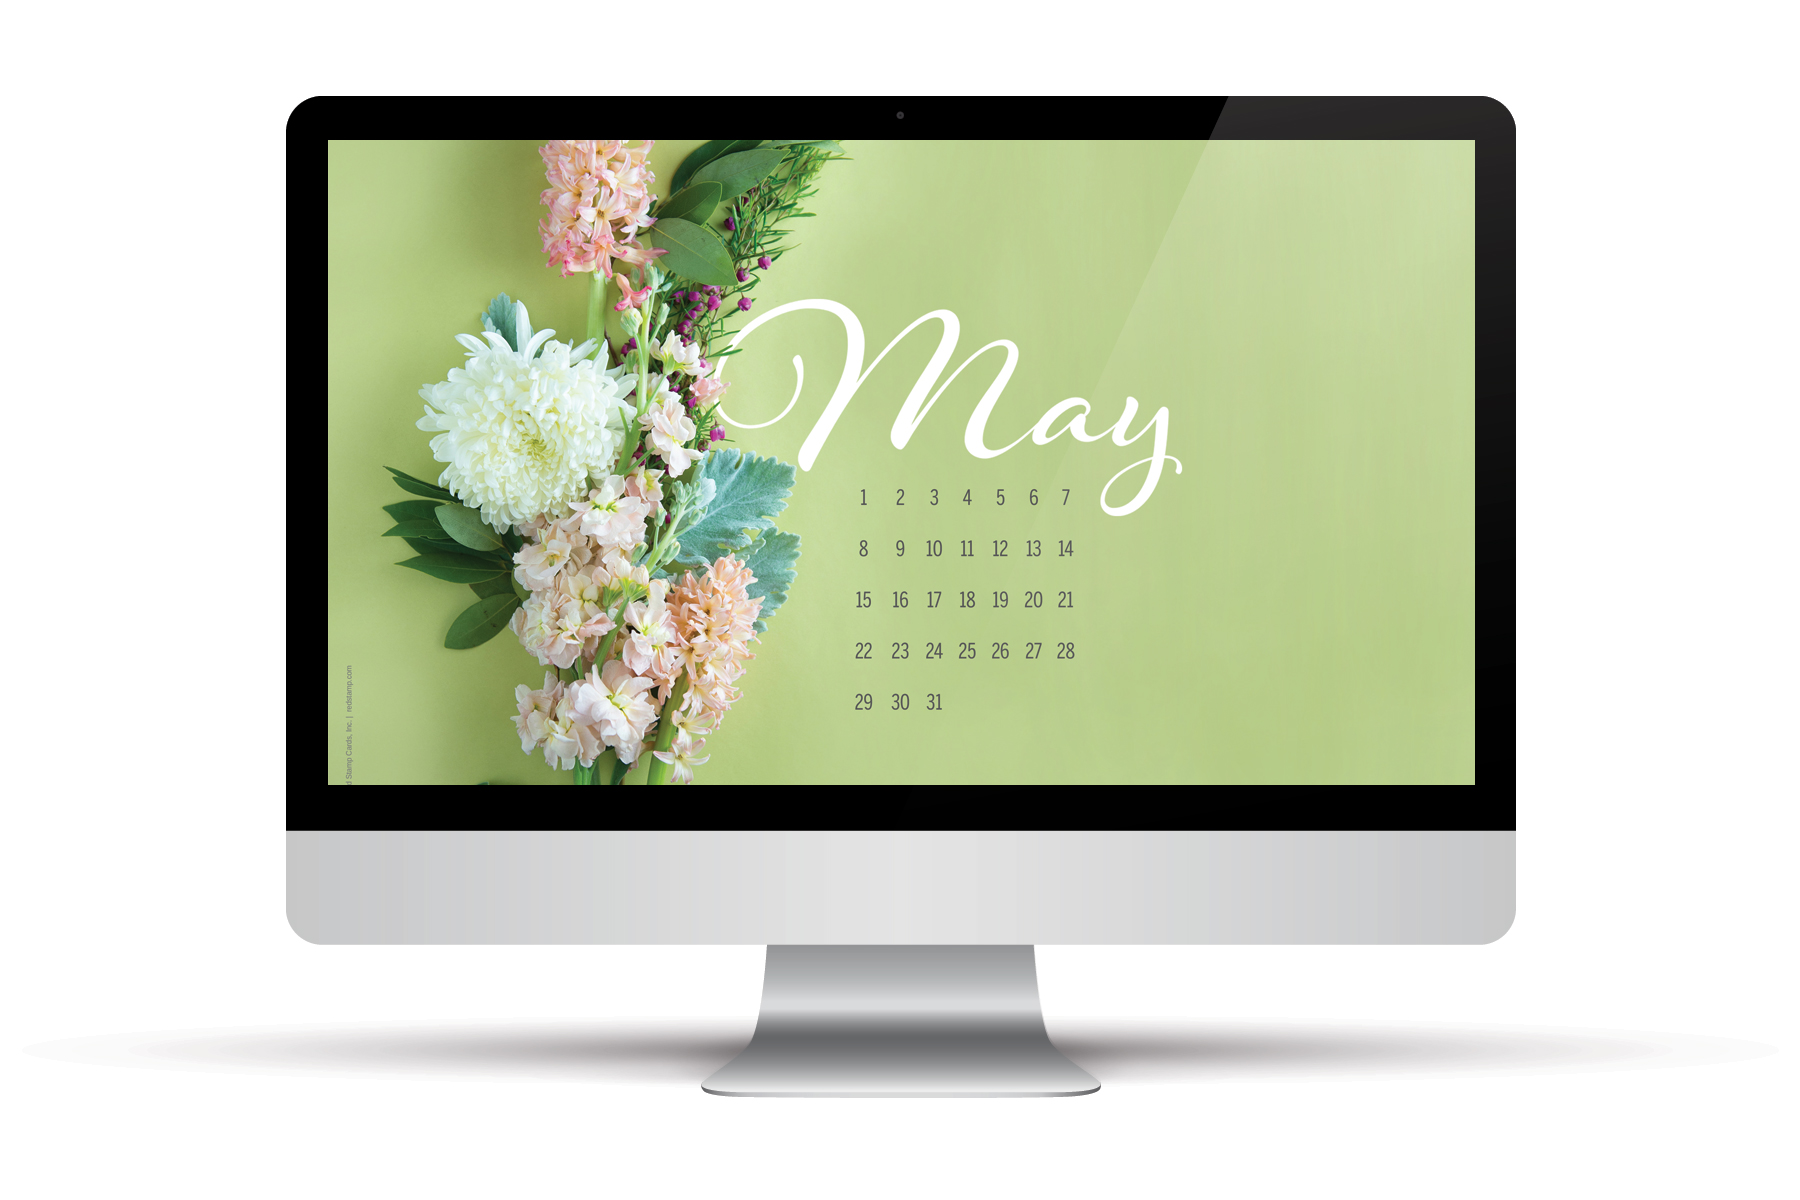 Enjoy our May 2016 free calendars and wallpaper We were inspired